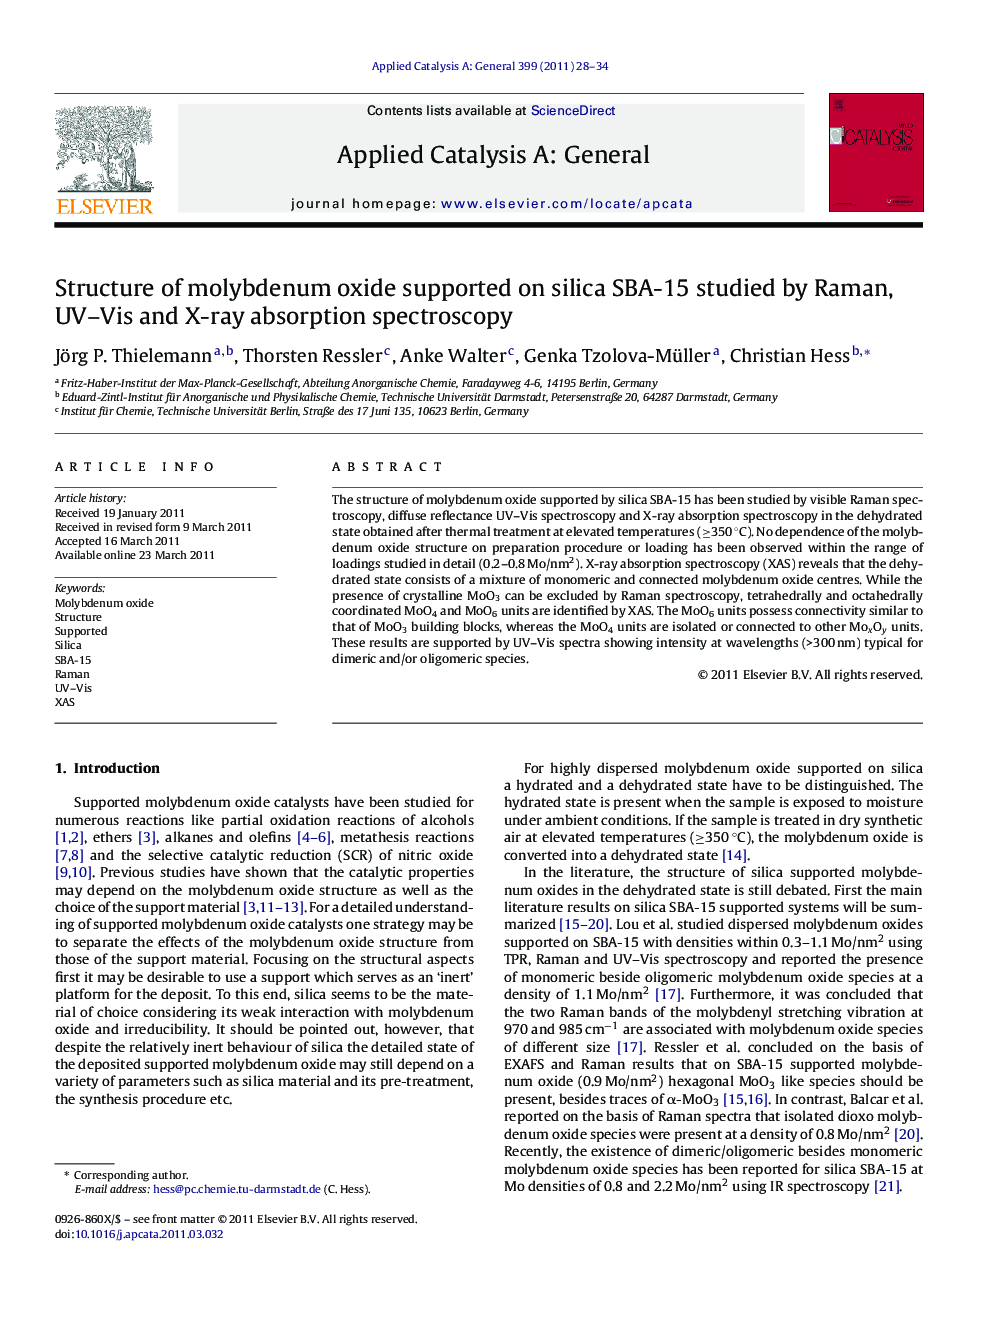 Structure of molybdenum oxide supported on silica SBA-15 studied by Raman, UV–Vis and X-ray absorption spectroscopy